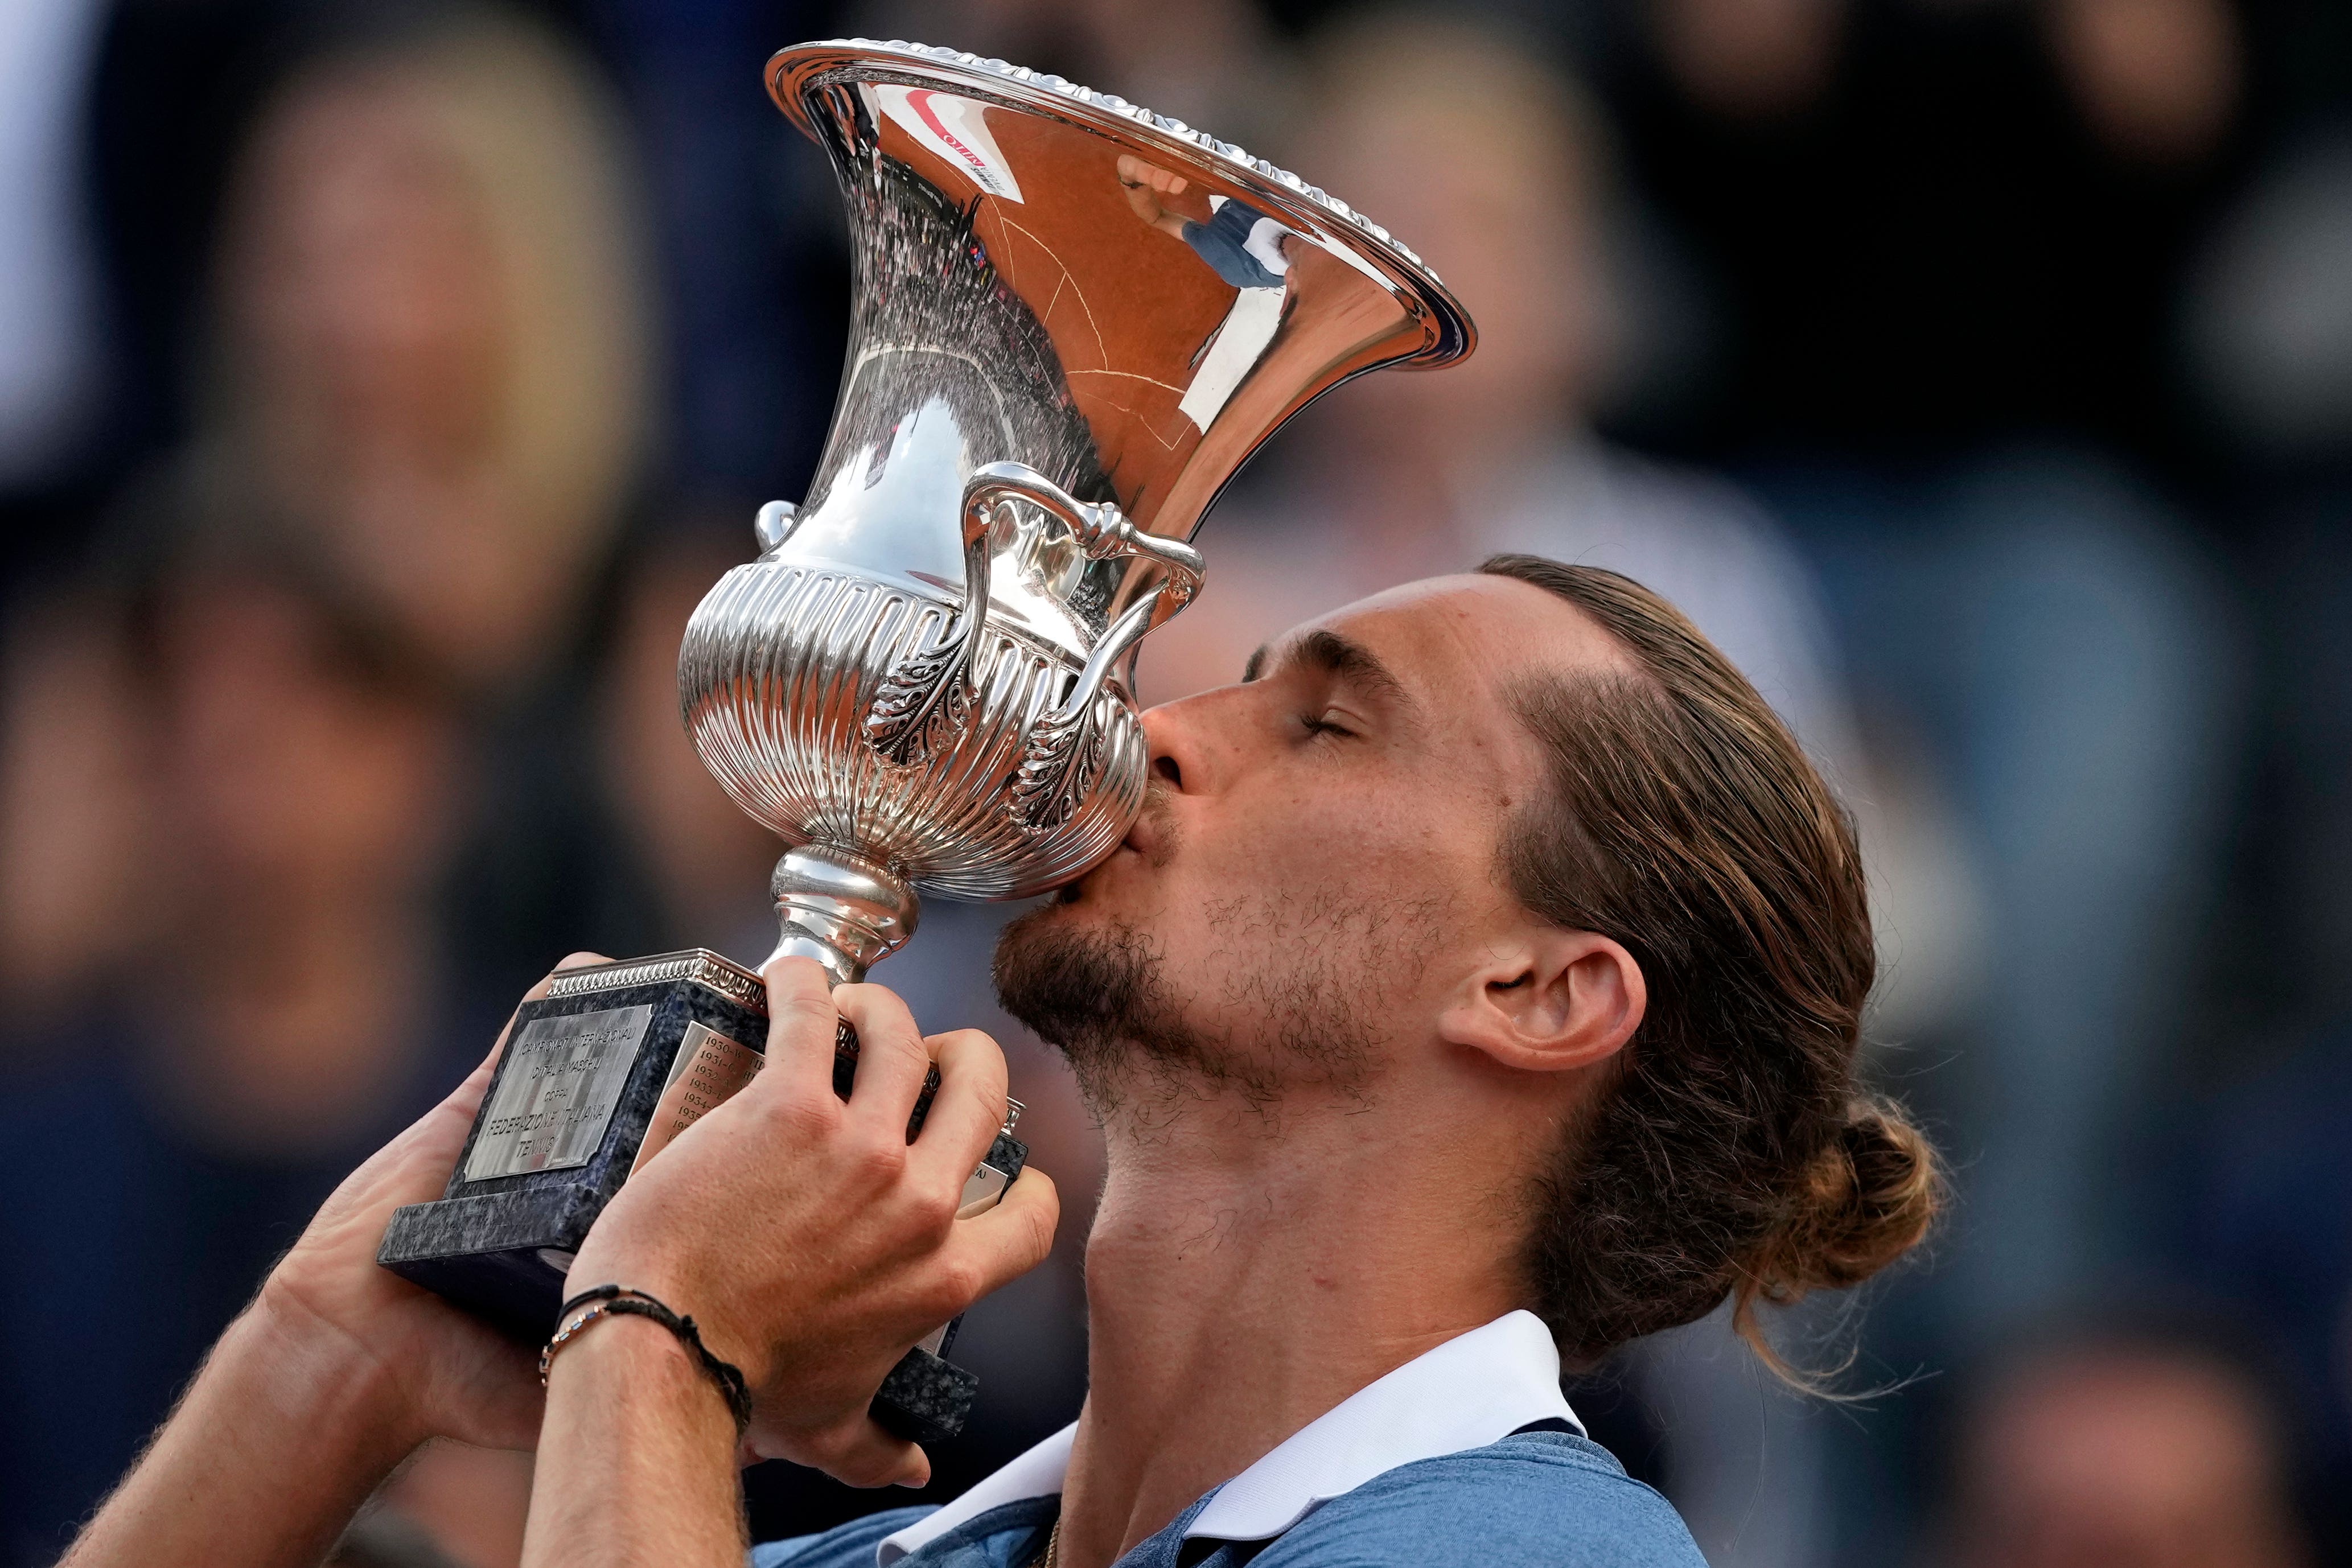 Alexander Zverev secured the Italian Open in a statement performance ahead of Roland Garros